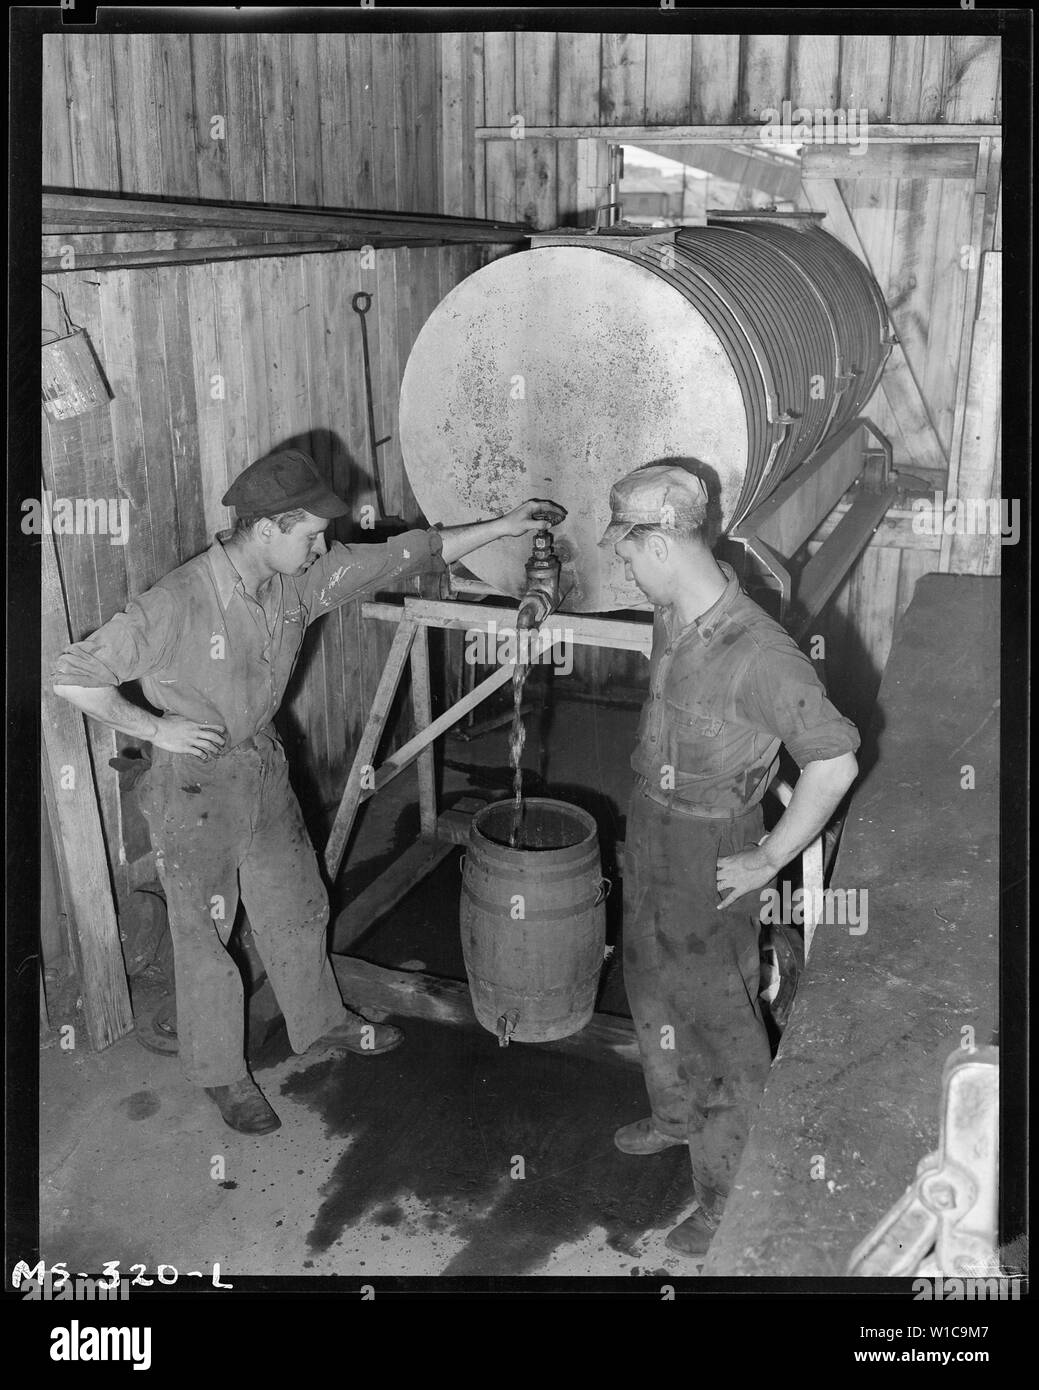 Drinking water for mine is trucked in. Tanks are then pushed on platform inside building, where water is drawn from them. Pyramid Coal Company, Victory Mine, Terre Haute, Vigo County, Indiana. Stock Photo